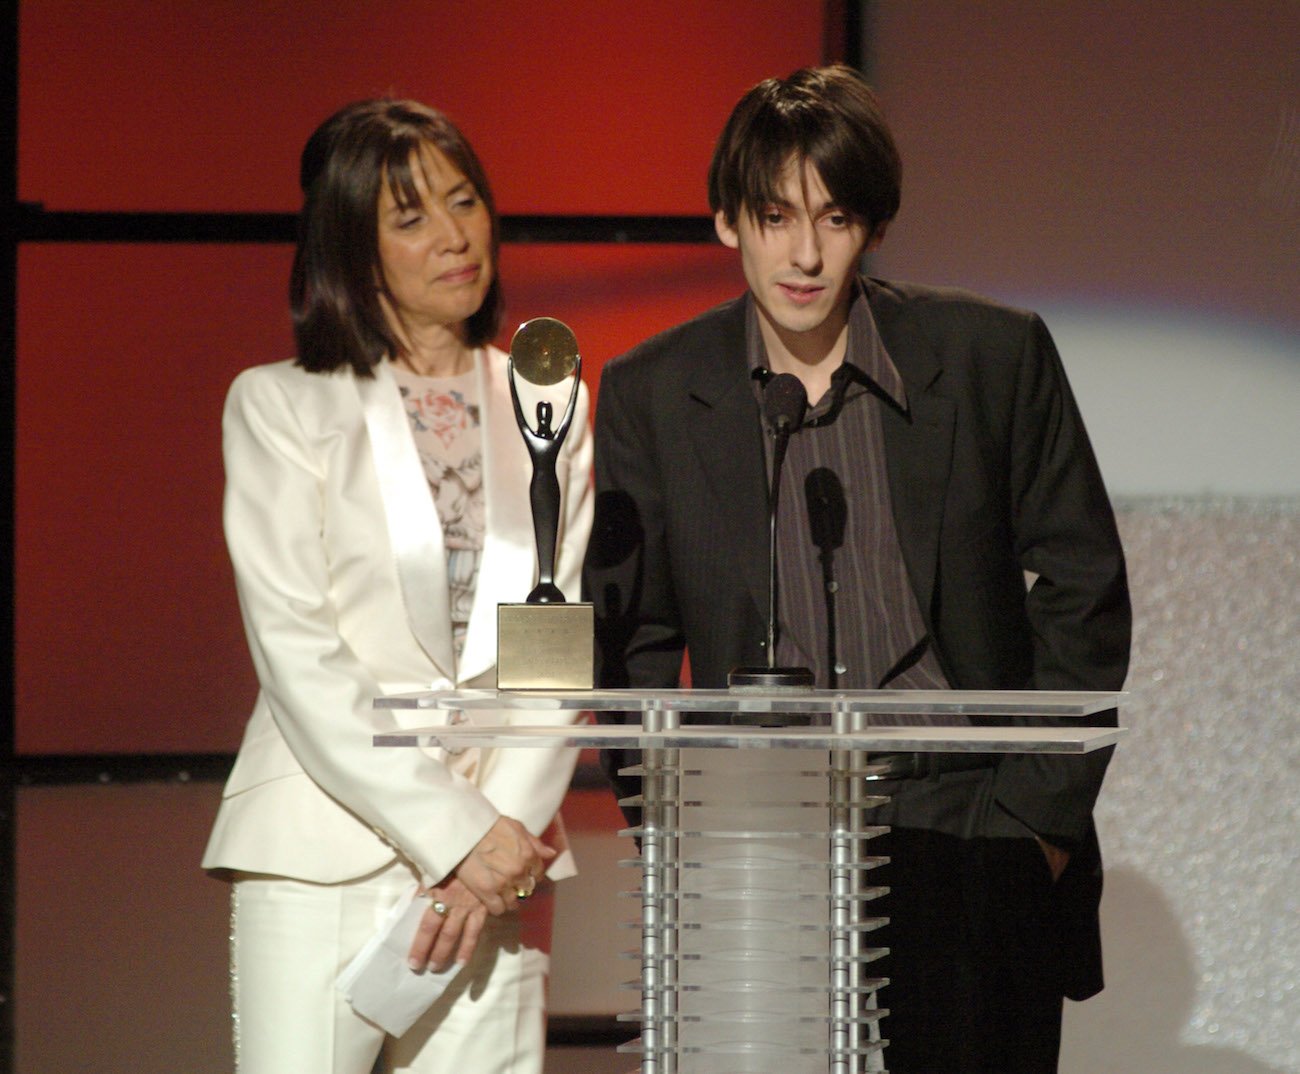 George Harrison's widow, Olivia, and their son, Dhani, at George's Rock & Roll Hall of Fame induction in 2004.